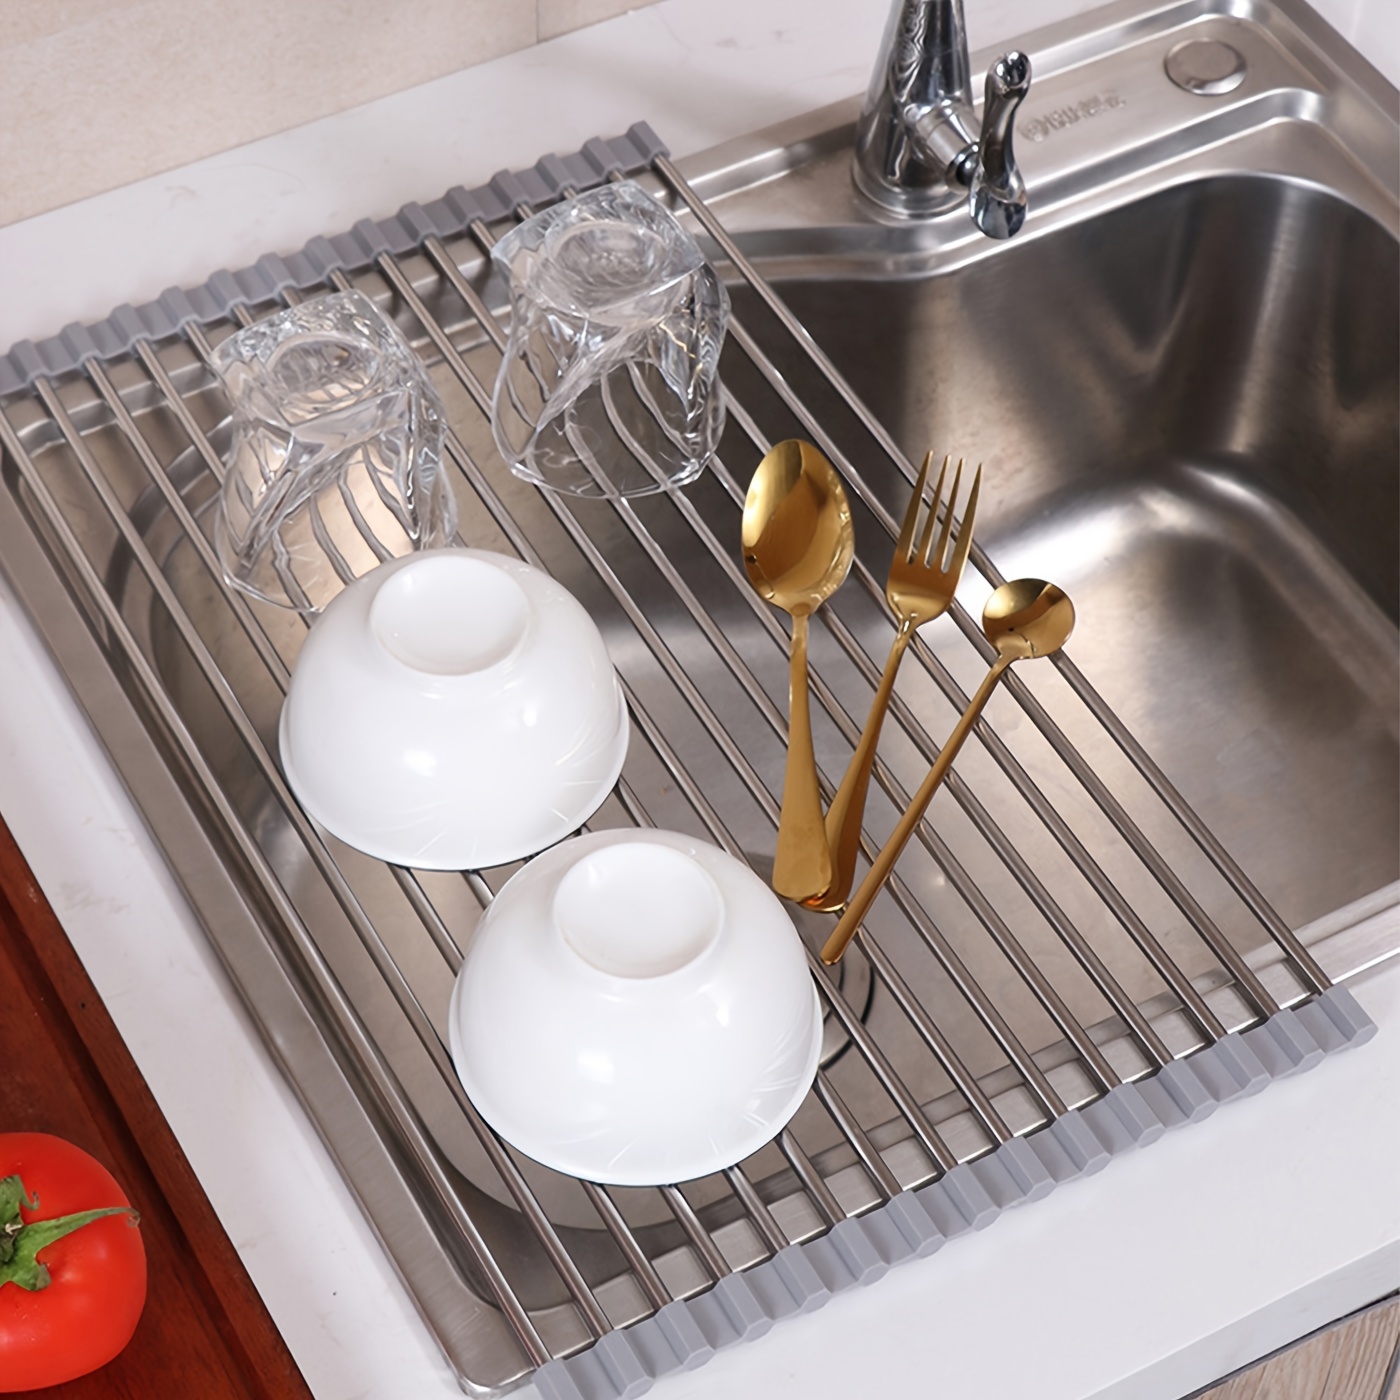 dish drainer that fits inside the sink